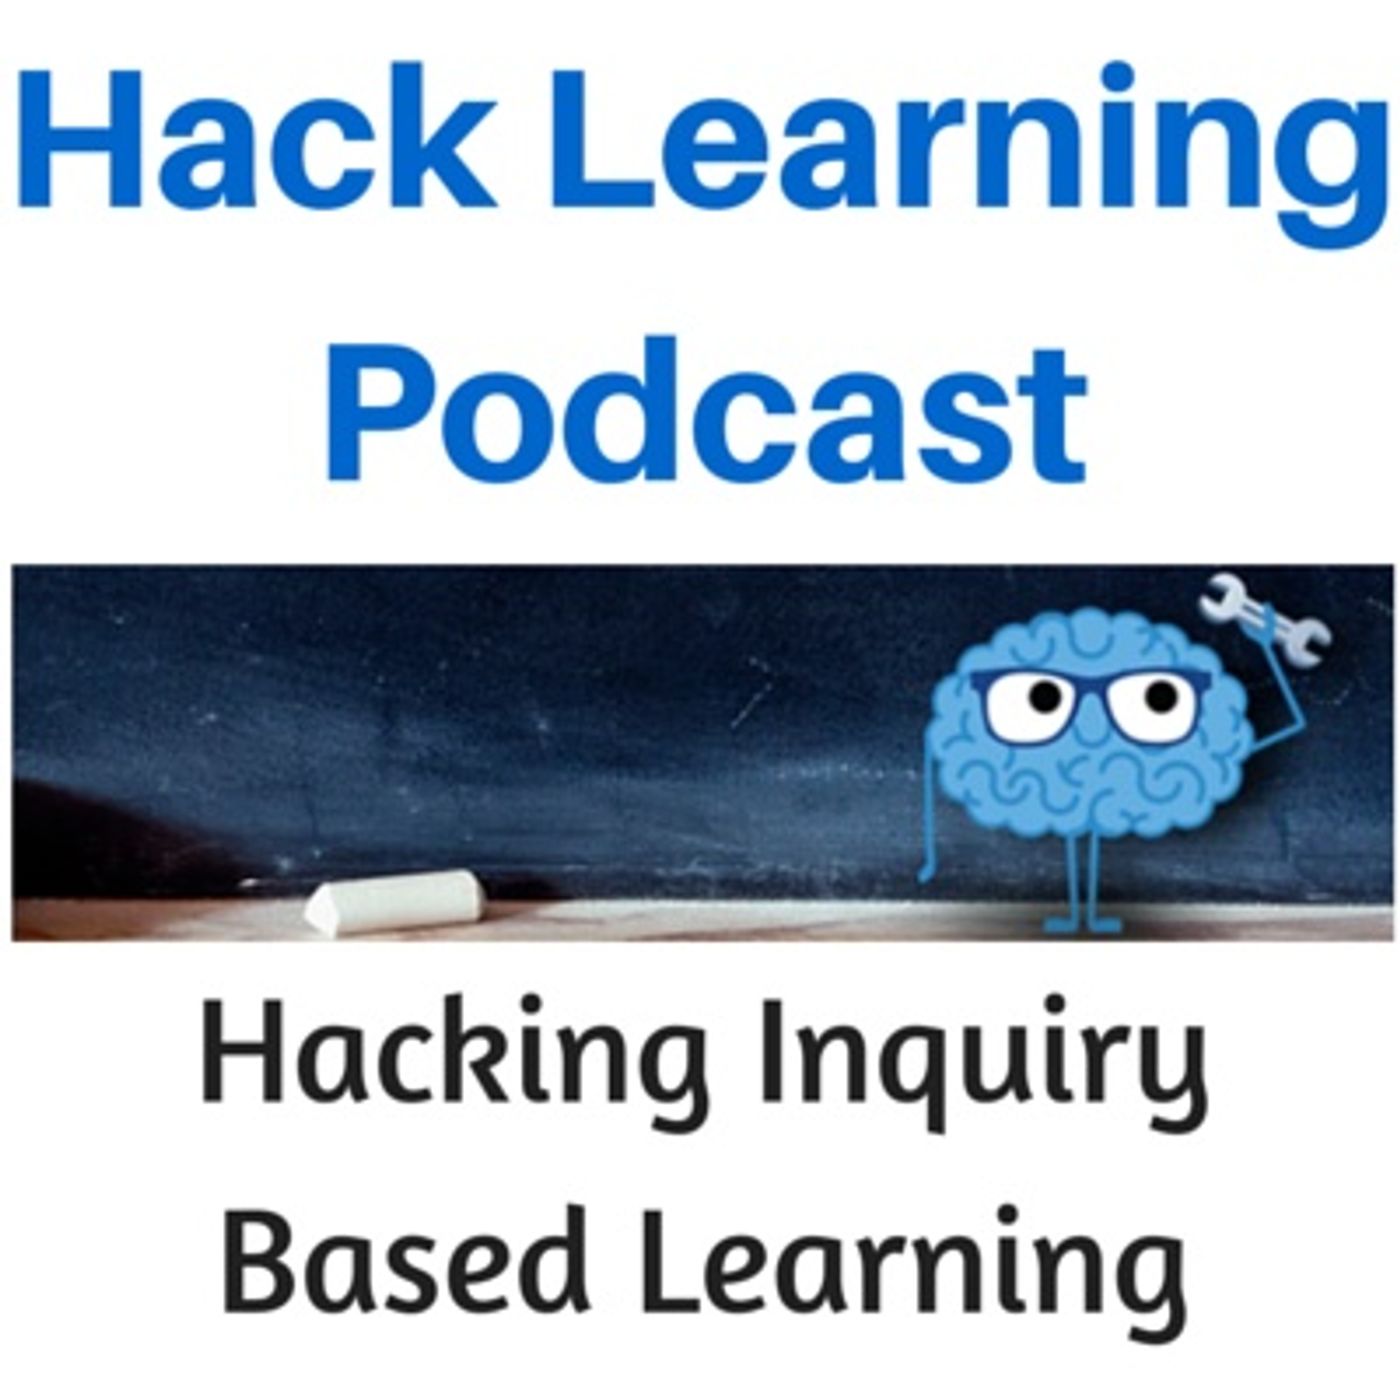 Hacking Inquiry Based Learning